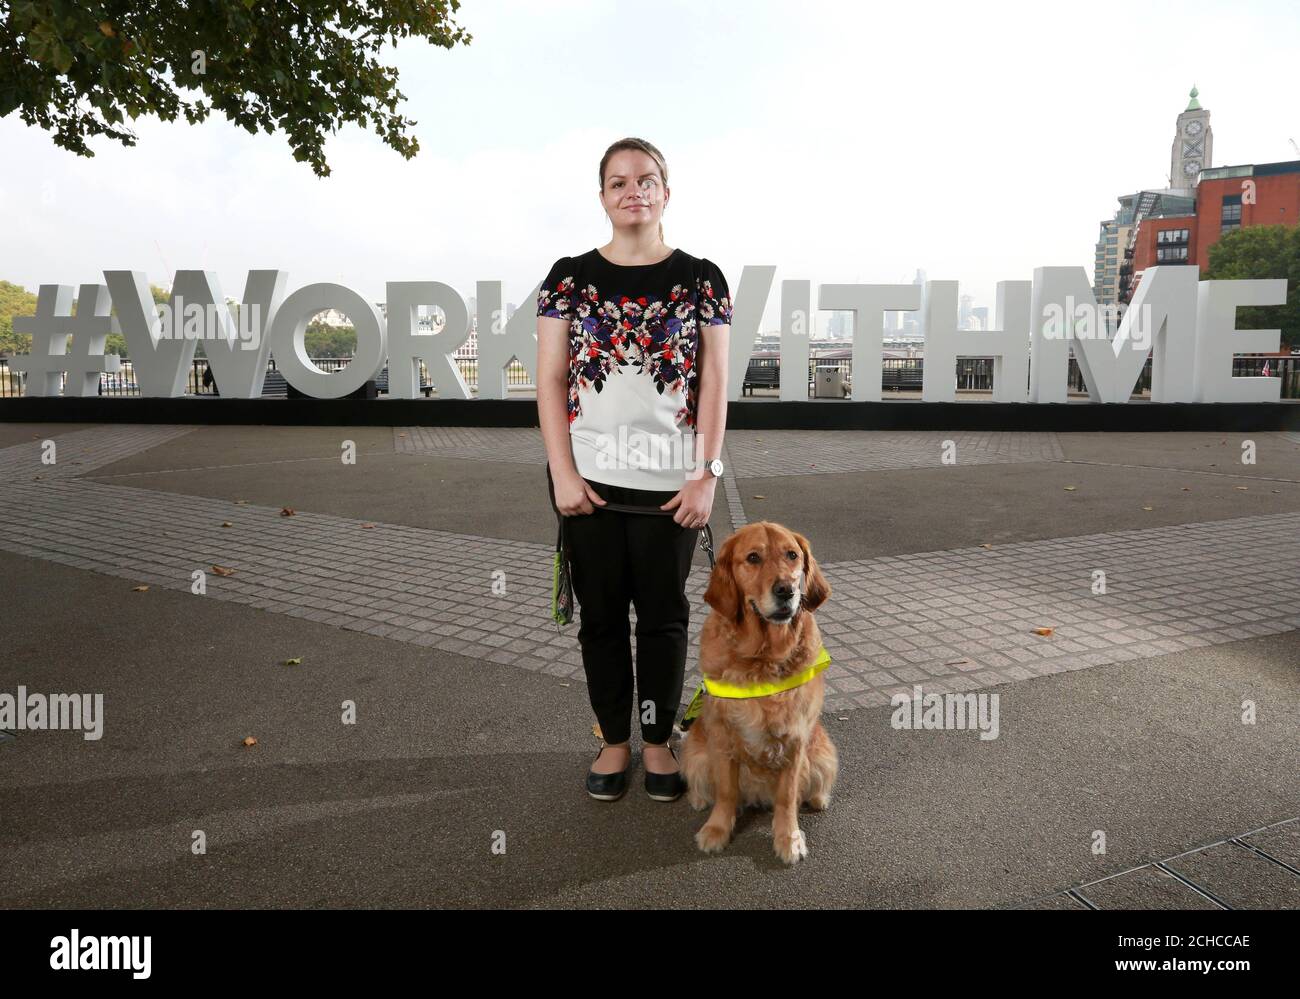 Campaigner Lauren Pitt, who has a Visual Impairment, launches the #WorkWithMe project with disability charity Scope and Virgin Media, on London's Southbank. PRESS ASSOCIATION. Issue date: Thursday September 28, 2017. The flagship campaign aims to support one million disabled people into work by 2020, with the launch of a new digital employment support service for disabled people, funded by Virgin Media. Photo credit should read: Matt Alexander/PA Wire Stock Photo